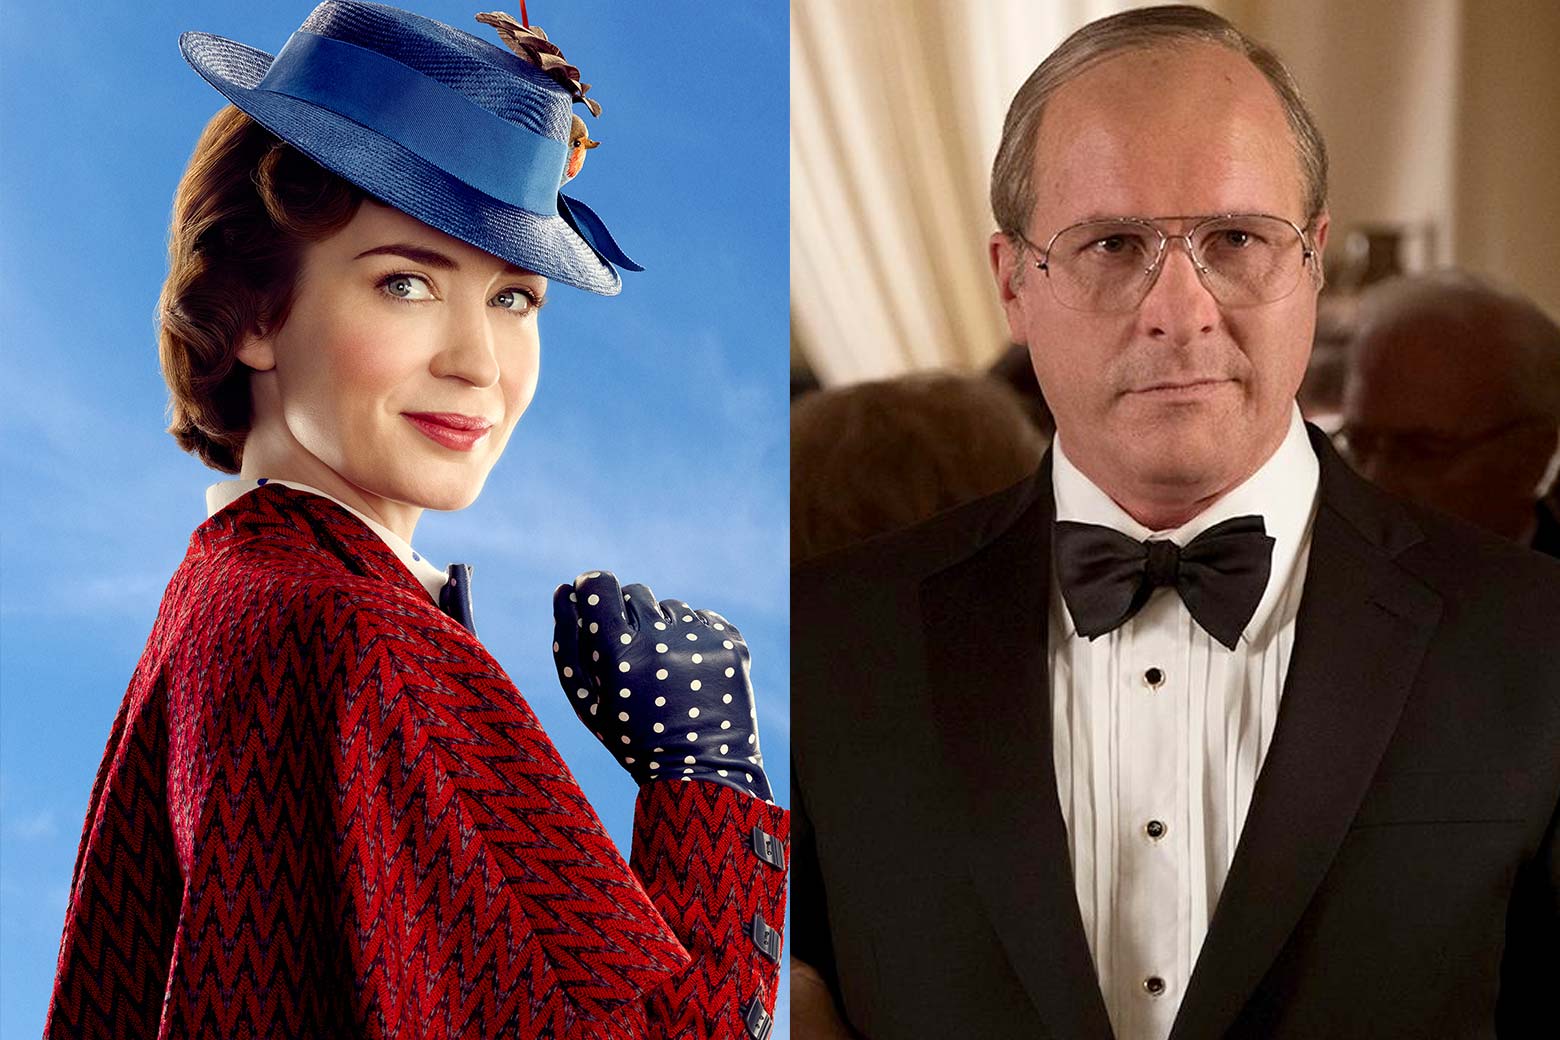 Emily Blunt as Mary Poppins and Christian Bale as Dick Cheney.